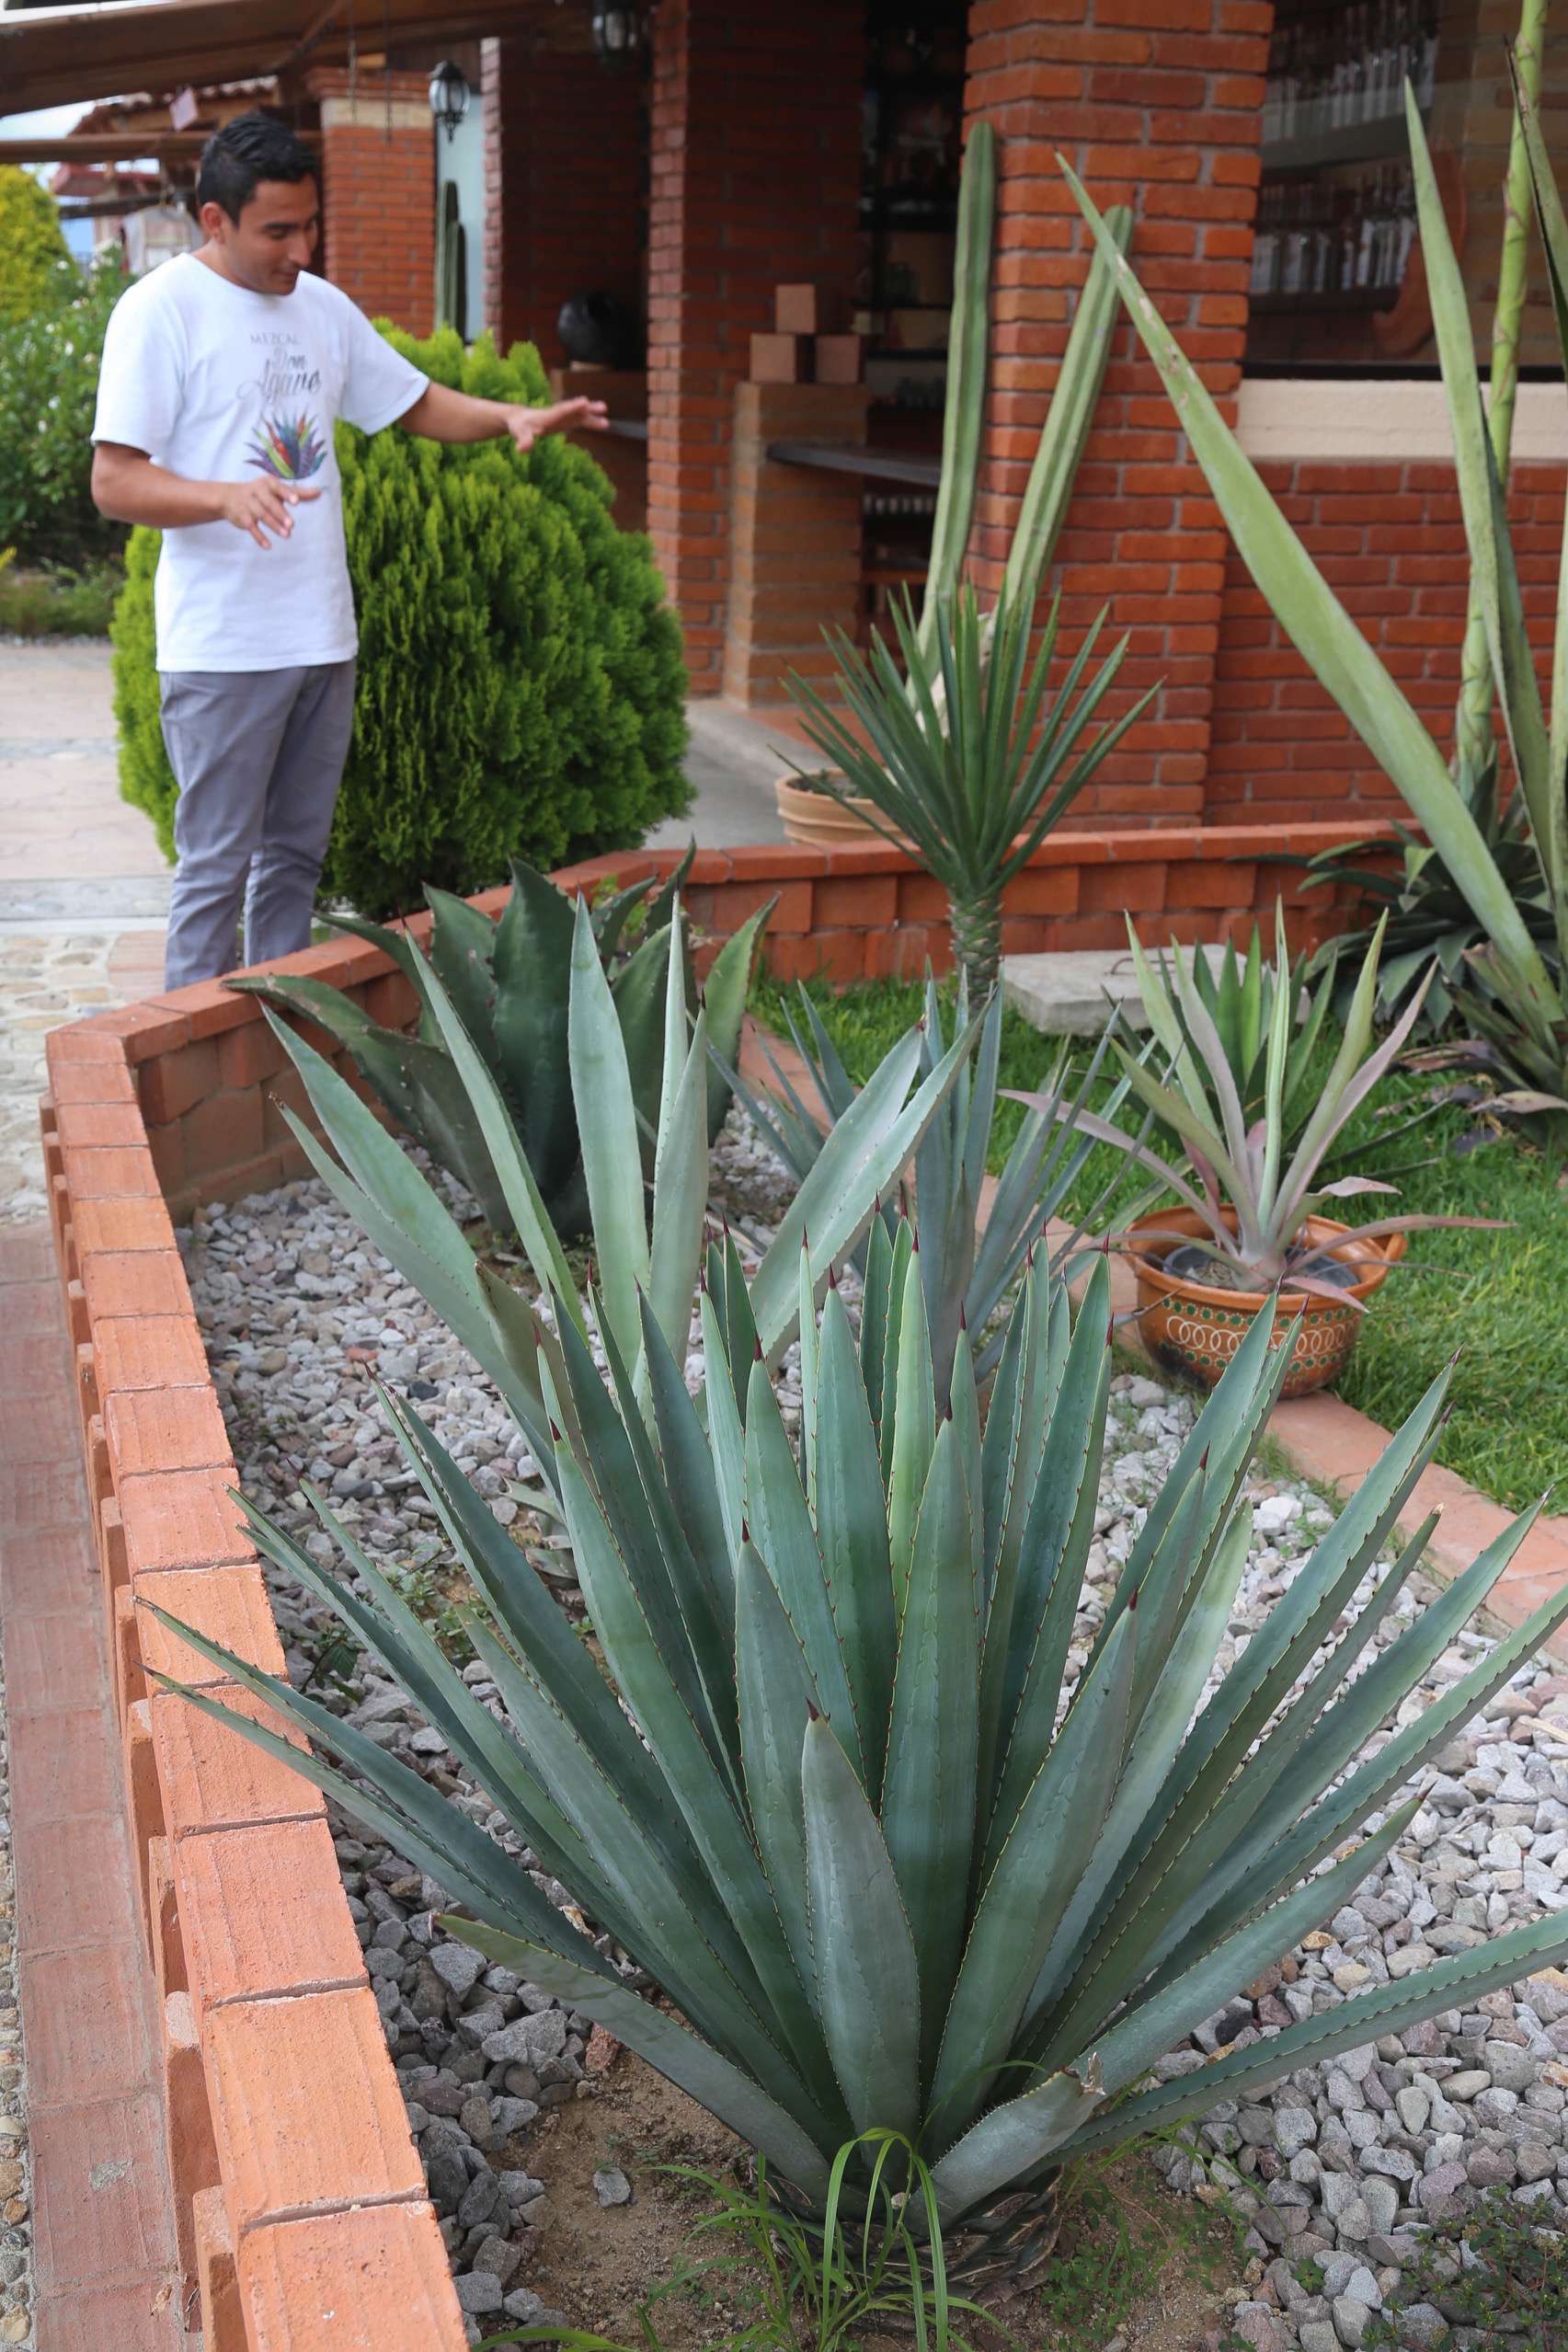 These are just a few of the dozens of agaves that can be used to make mezcal.